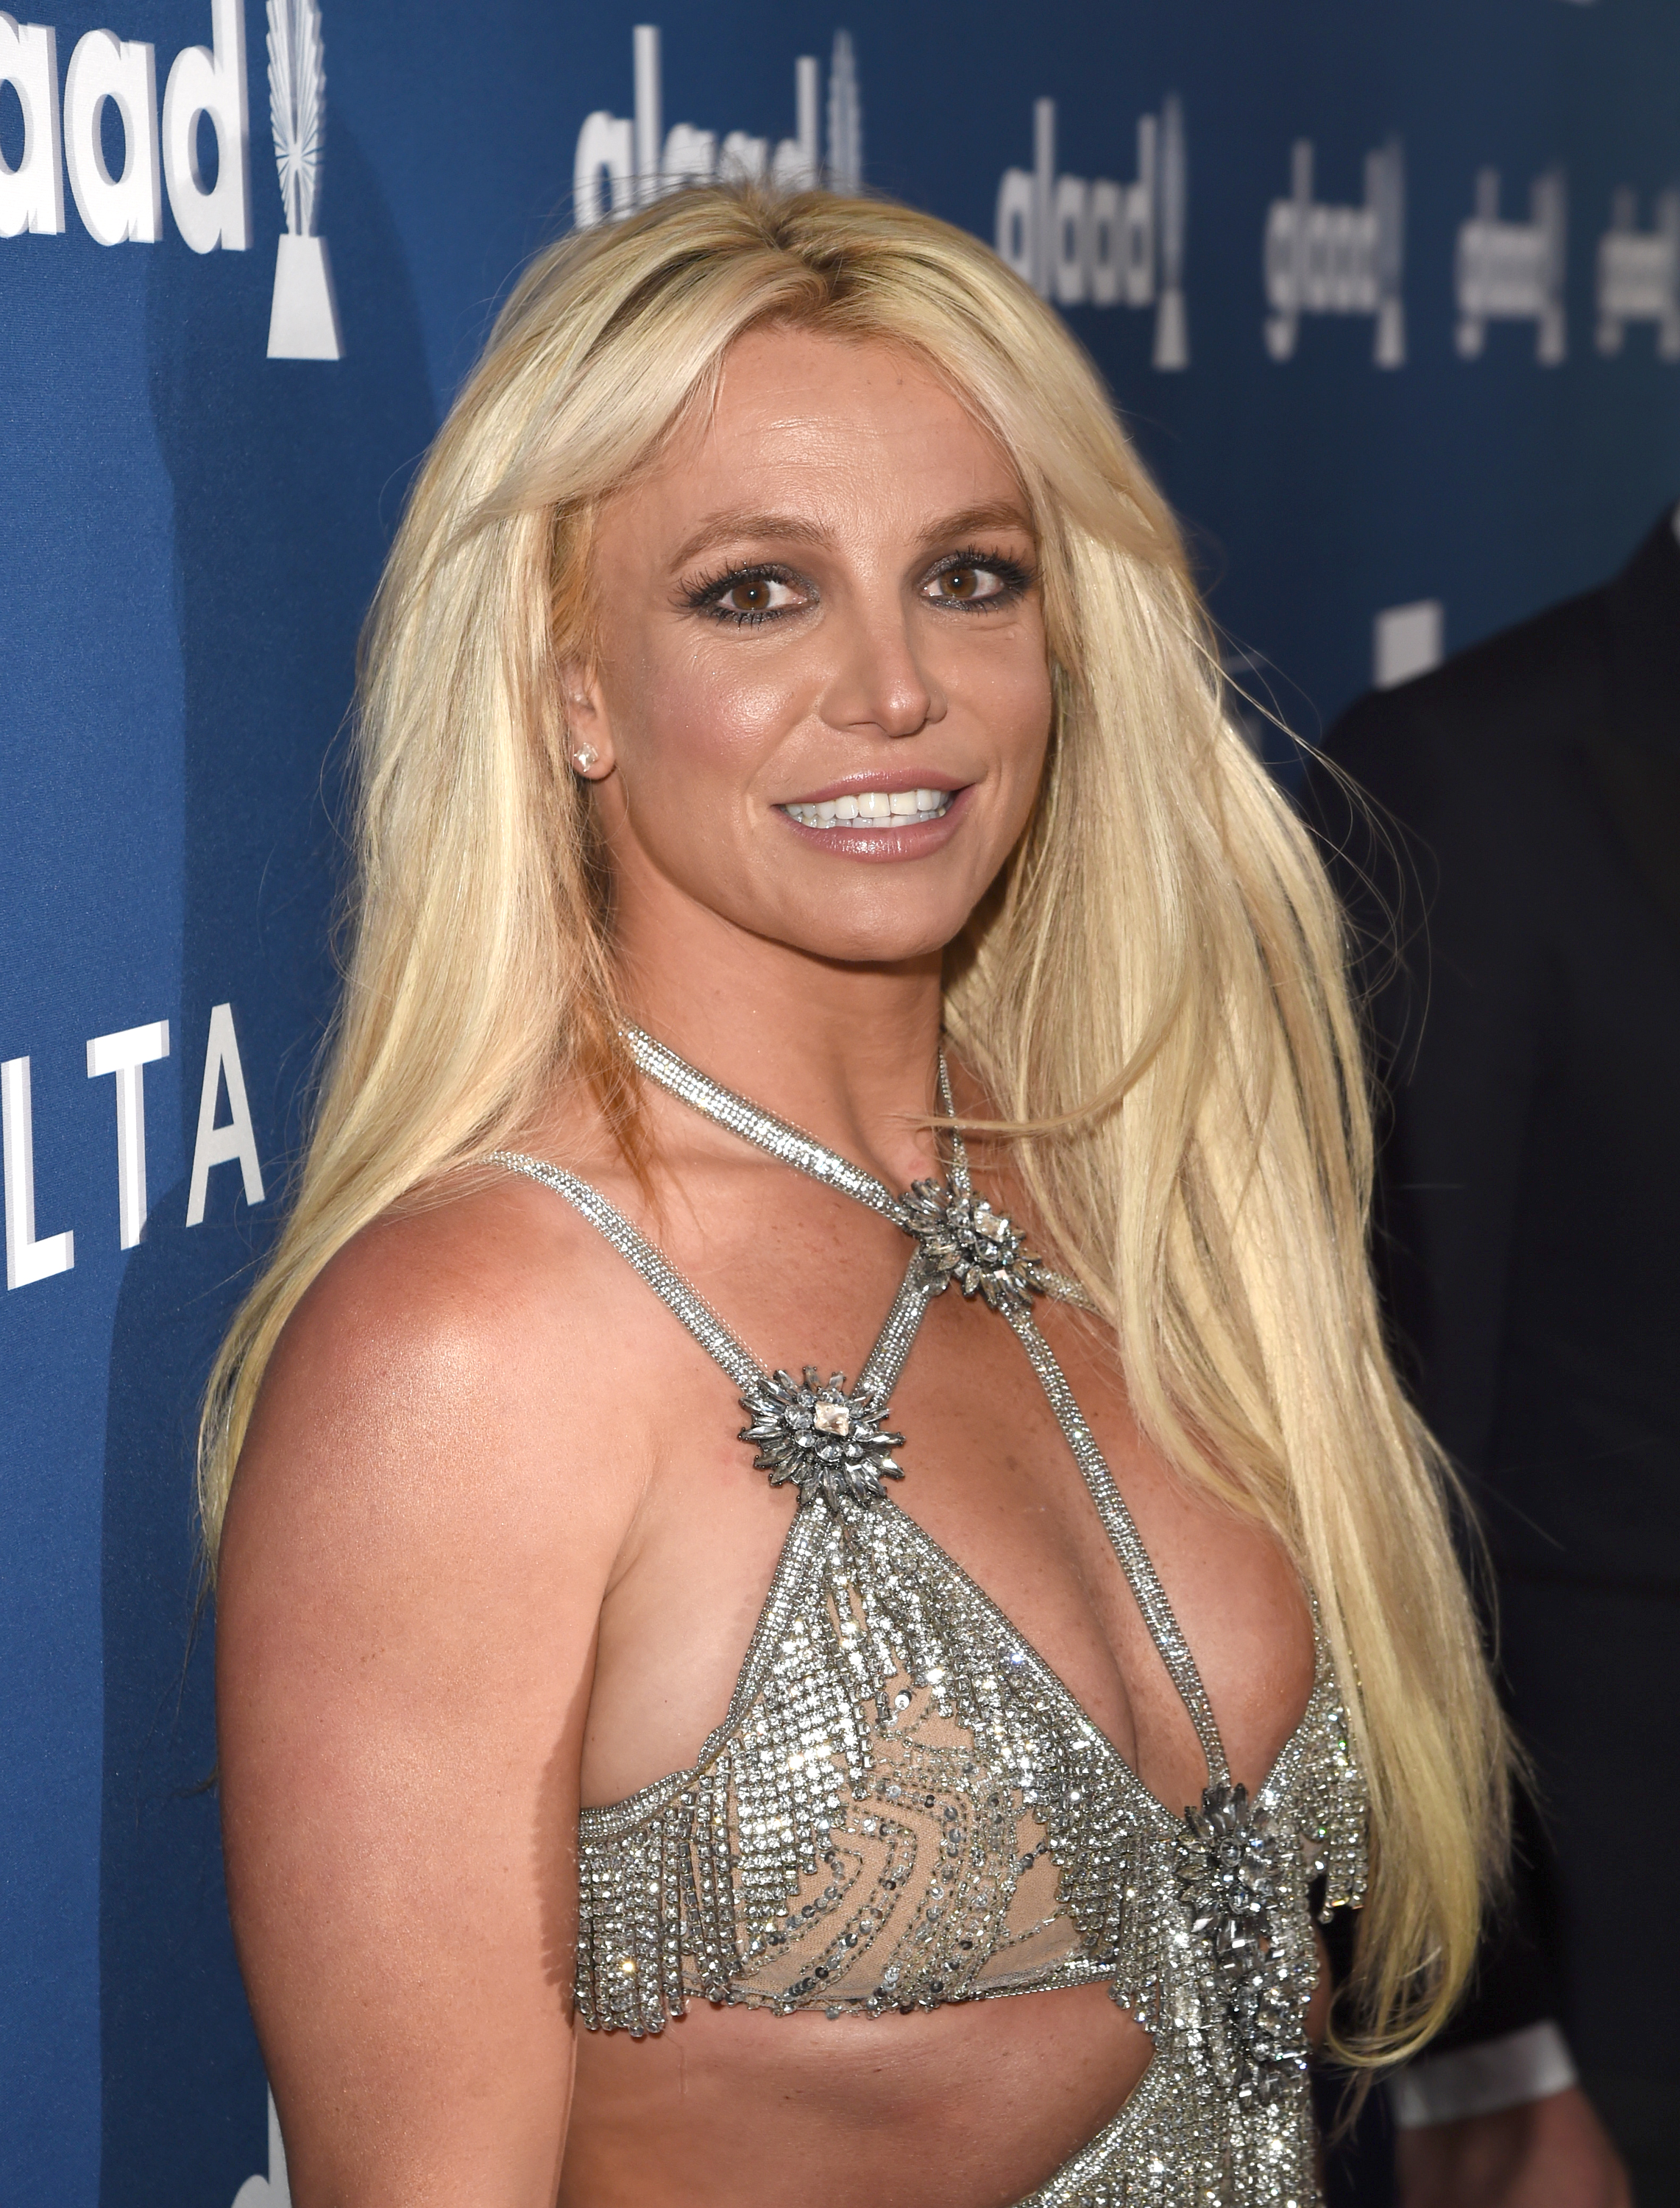 Following Ozzy Osbourne's comments, Britney Spears wrote a lengthy response telling the family to 'kindly f**k off'